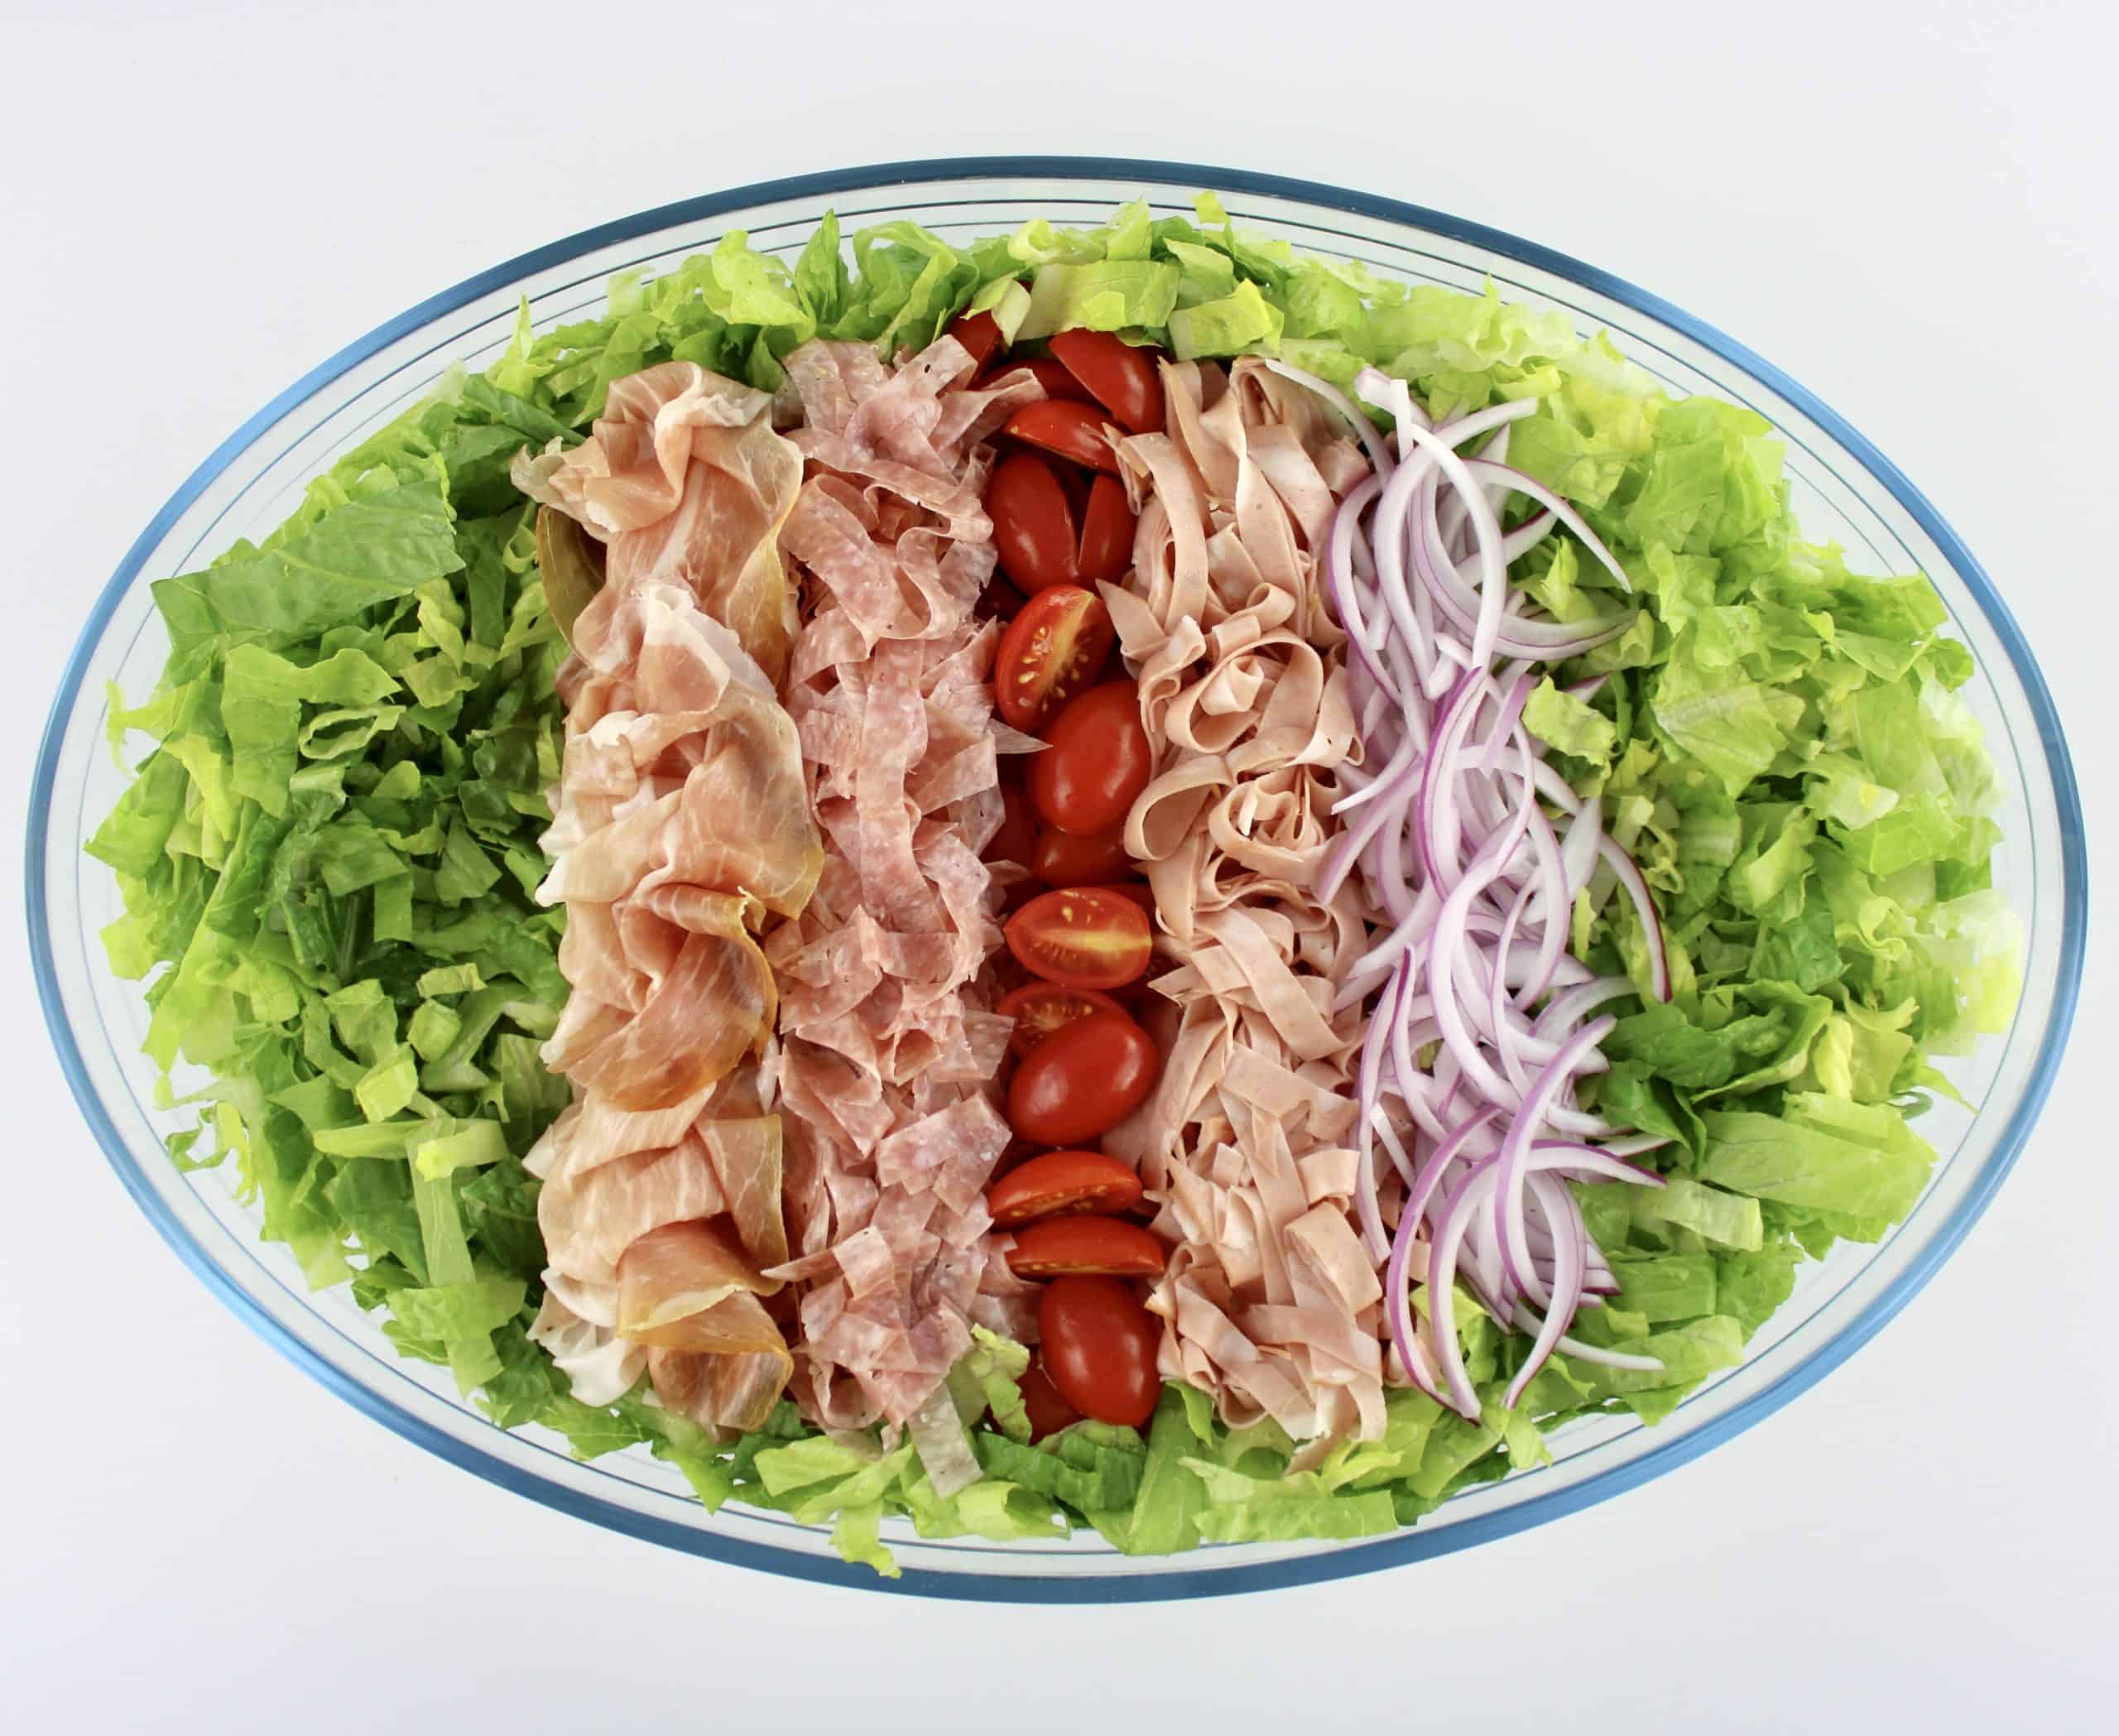 shredded lettuce in oval glass bowl with rows of tomatoes and shredded salami and mortadella in the center with prosciutto and sliced red onions on the sides